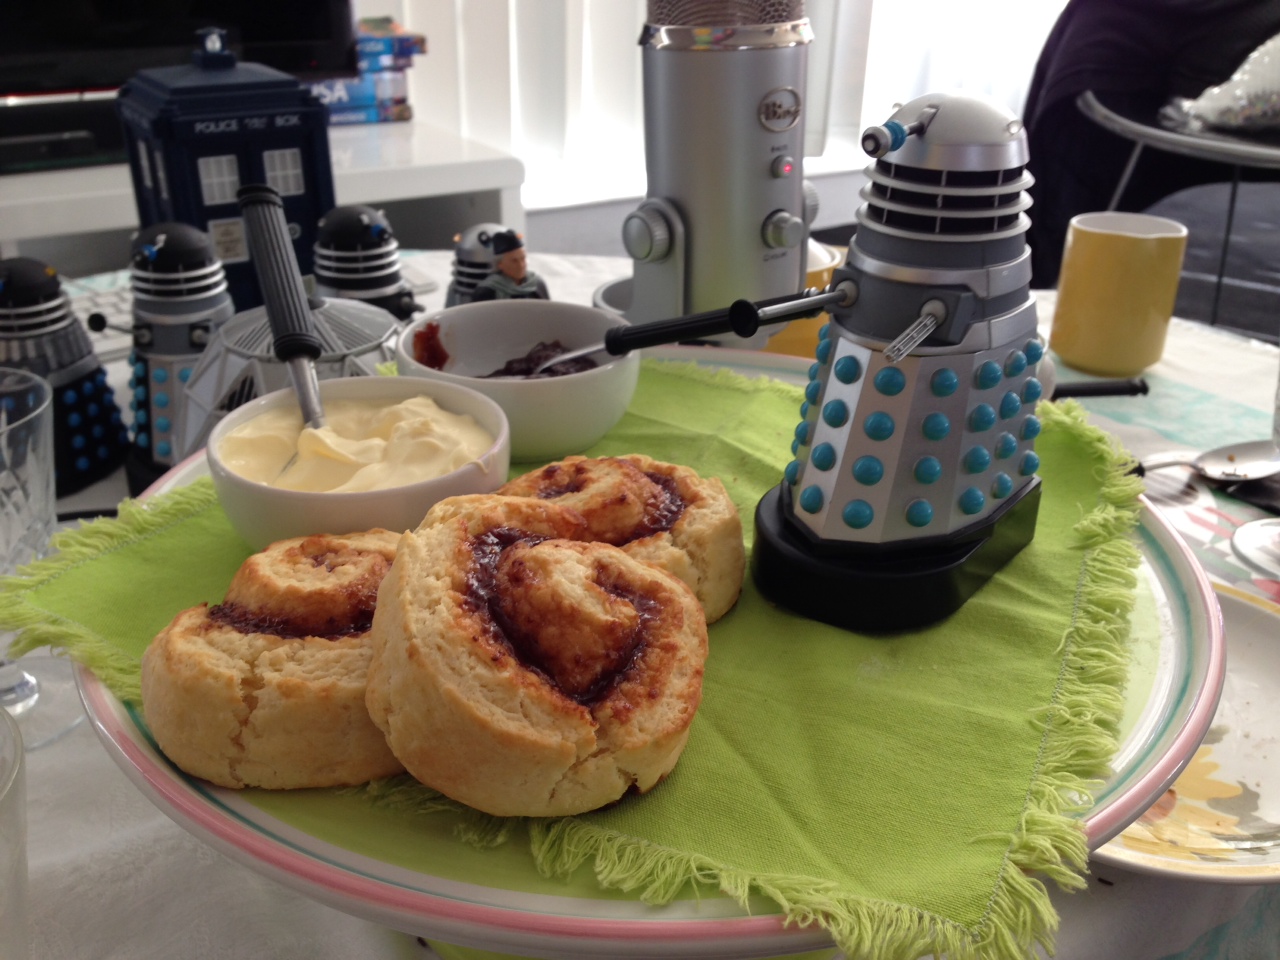 Some optera larvae scrolls being menaced by a toy Dalek